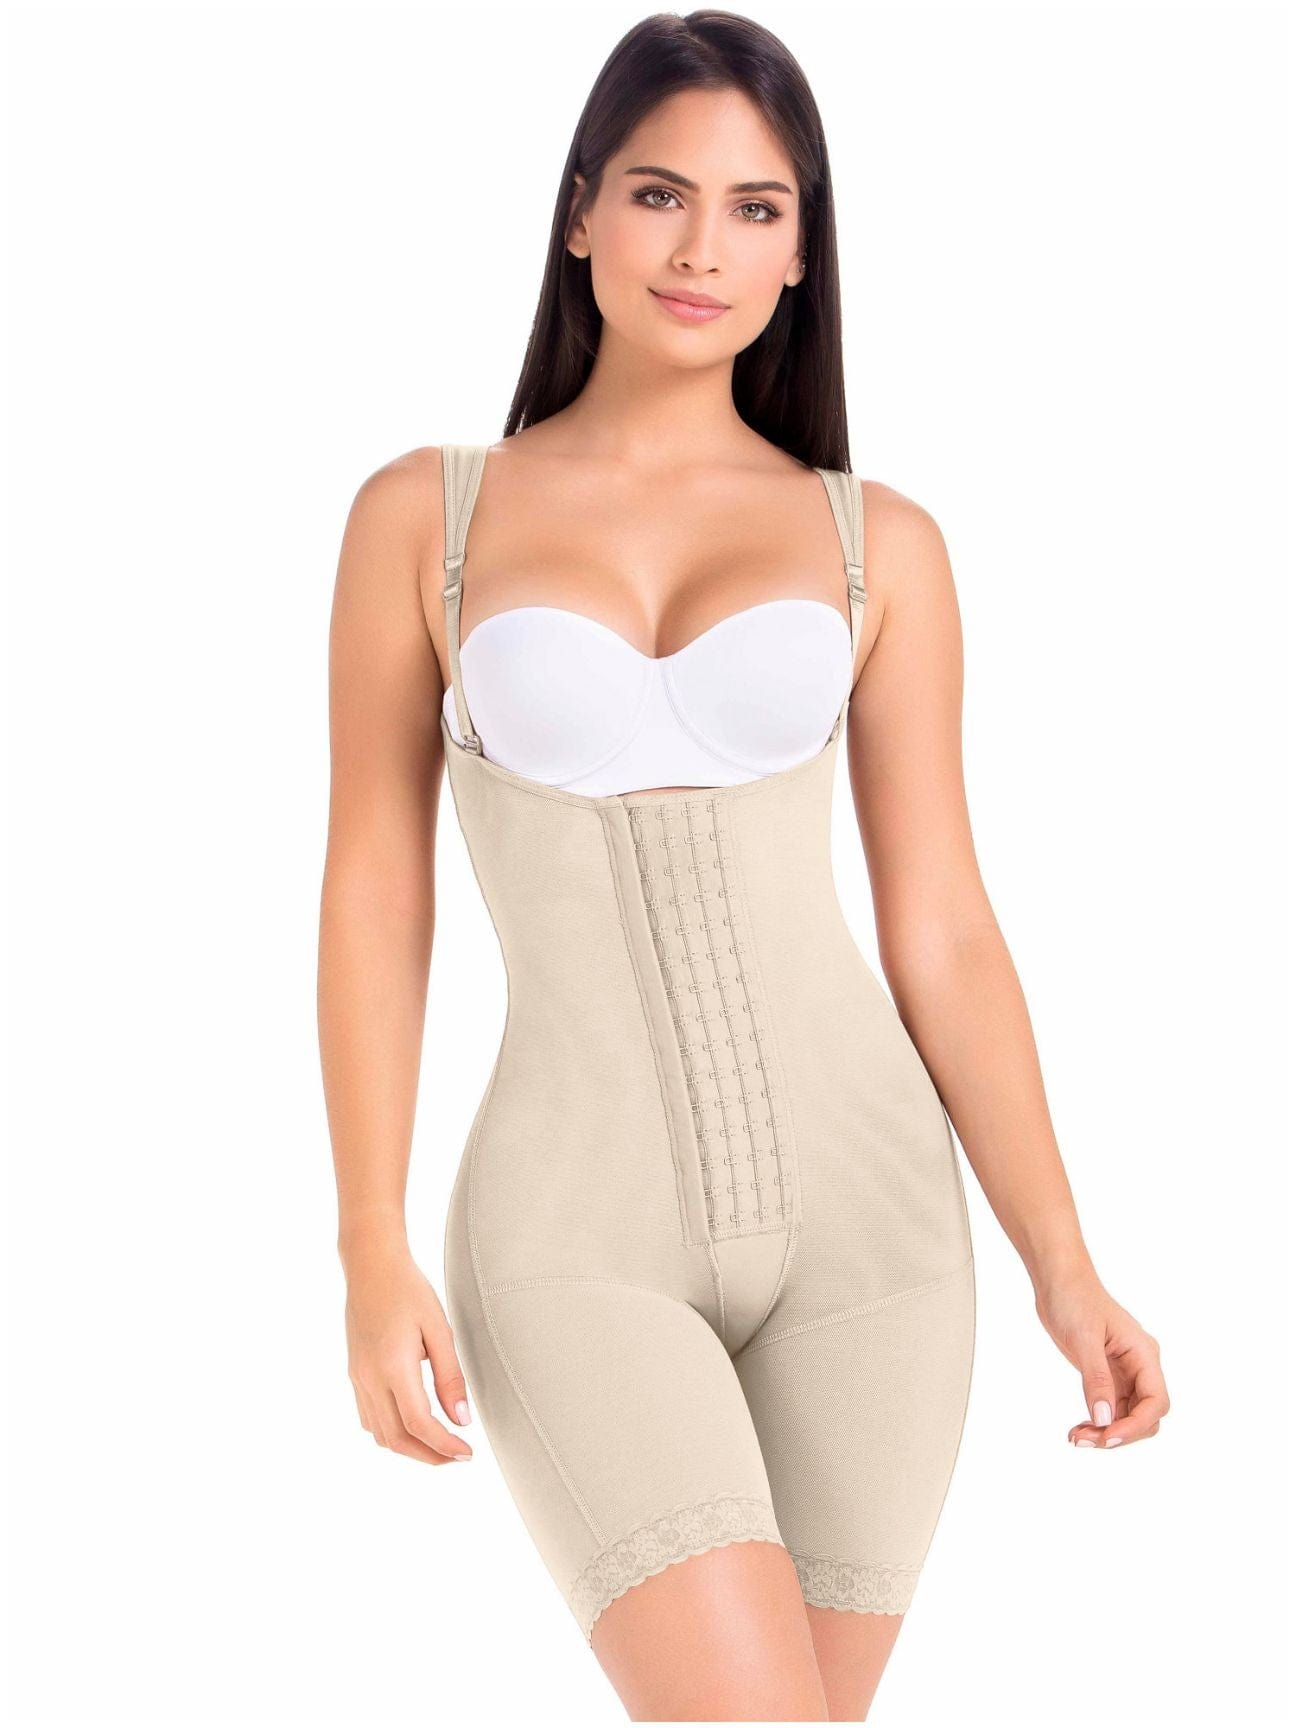 High Compression Wide straps Mid-Thigh Body Suit Slimming Shaper - -Nude-S